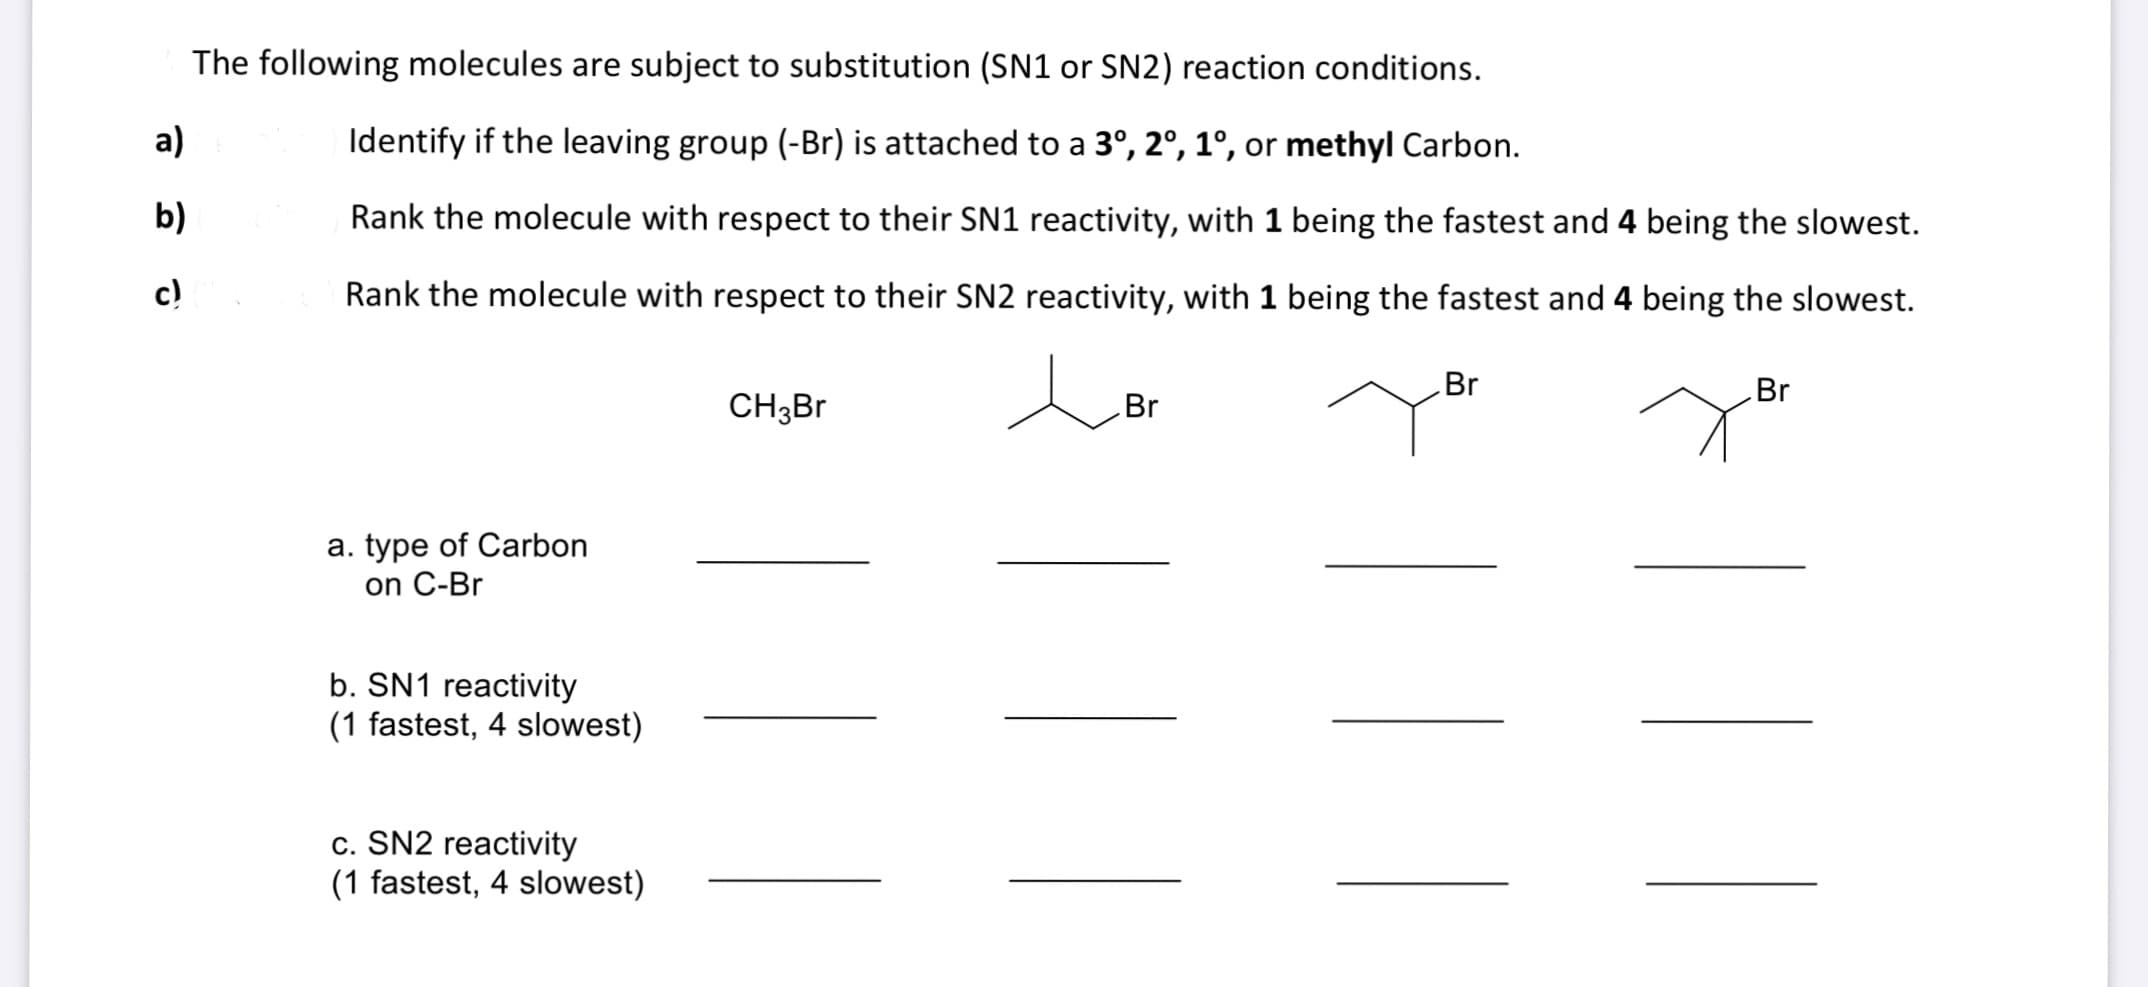 The following molecules are subject to substitution (SN1 or SN2) reaction conditions.
a)
Identify if the leaving group (-Br) is attached to a 3°, 2°, 1°, or methyl Carbon.
b)
Rank the molecule with respect to their SN1 reactivity, with 1 being the fastest and 4 being the slowest.
c)
Rank the molecule with respect to their SN2 reactivity, with 1 being the fastest and 4 being the slowest.
Br
Br
CH3B
Br
a. type of Carbon
on C-Br
b. SN1 reactivity
(1 fastest, 4 slowest)
c. SN2 reactivity
(1 fastest, 4 slowest)
